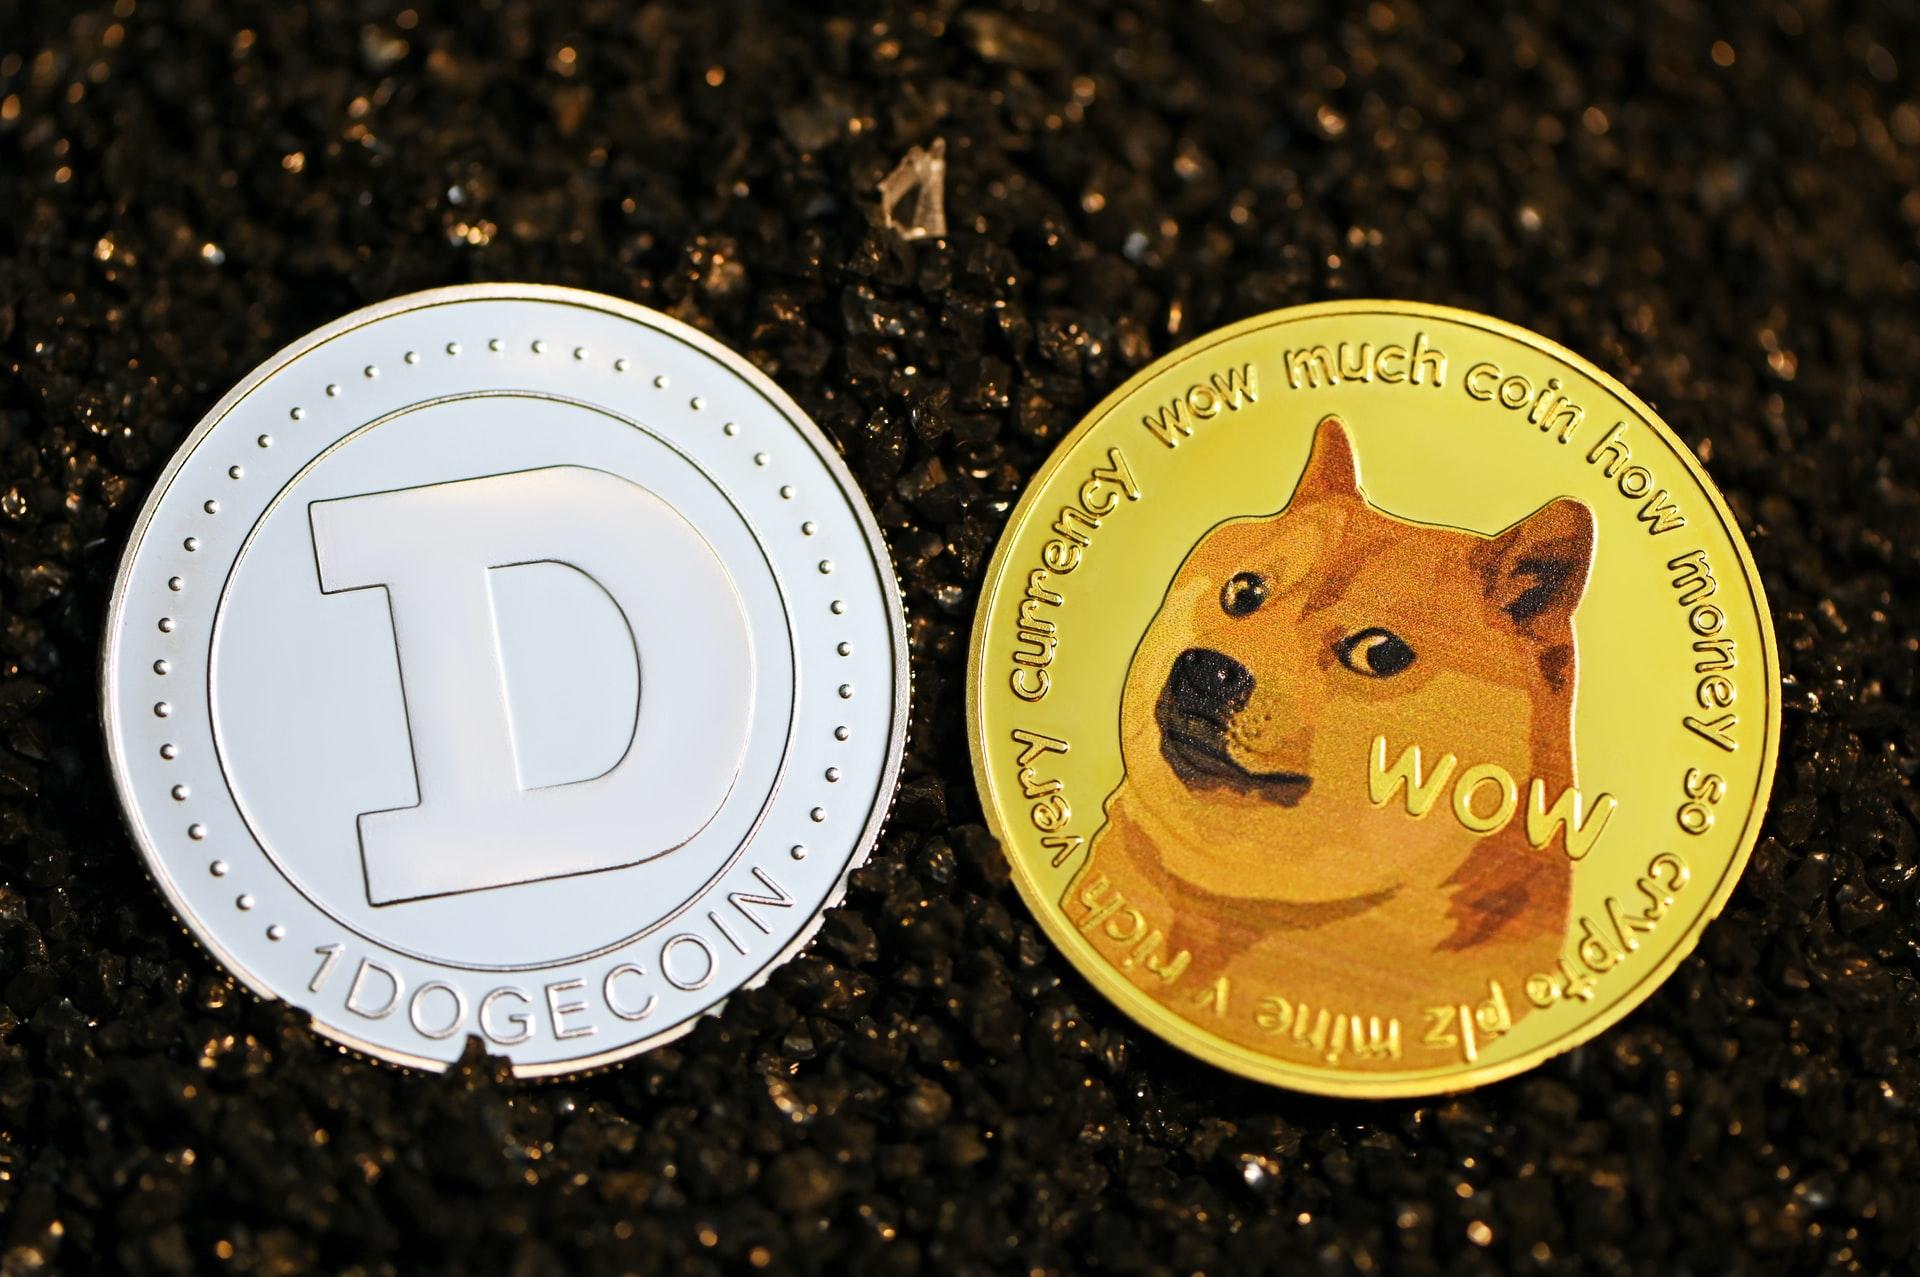 Dogecoin was meant to be satirical, but it now has some real investors.